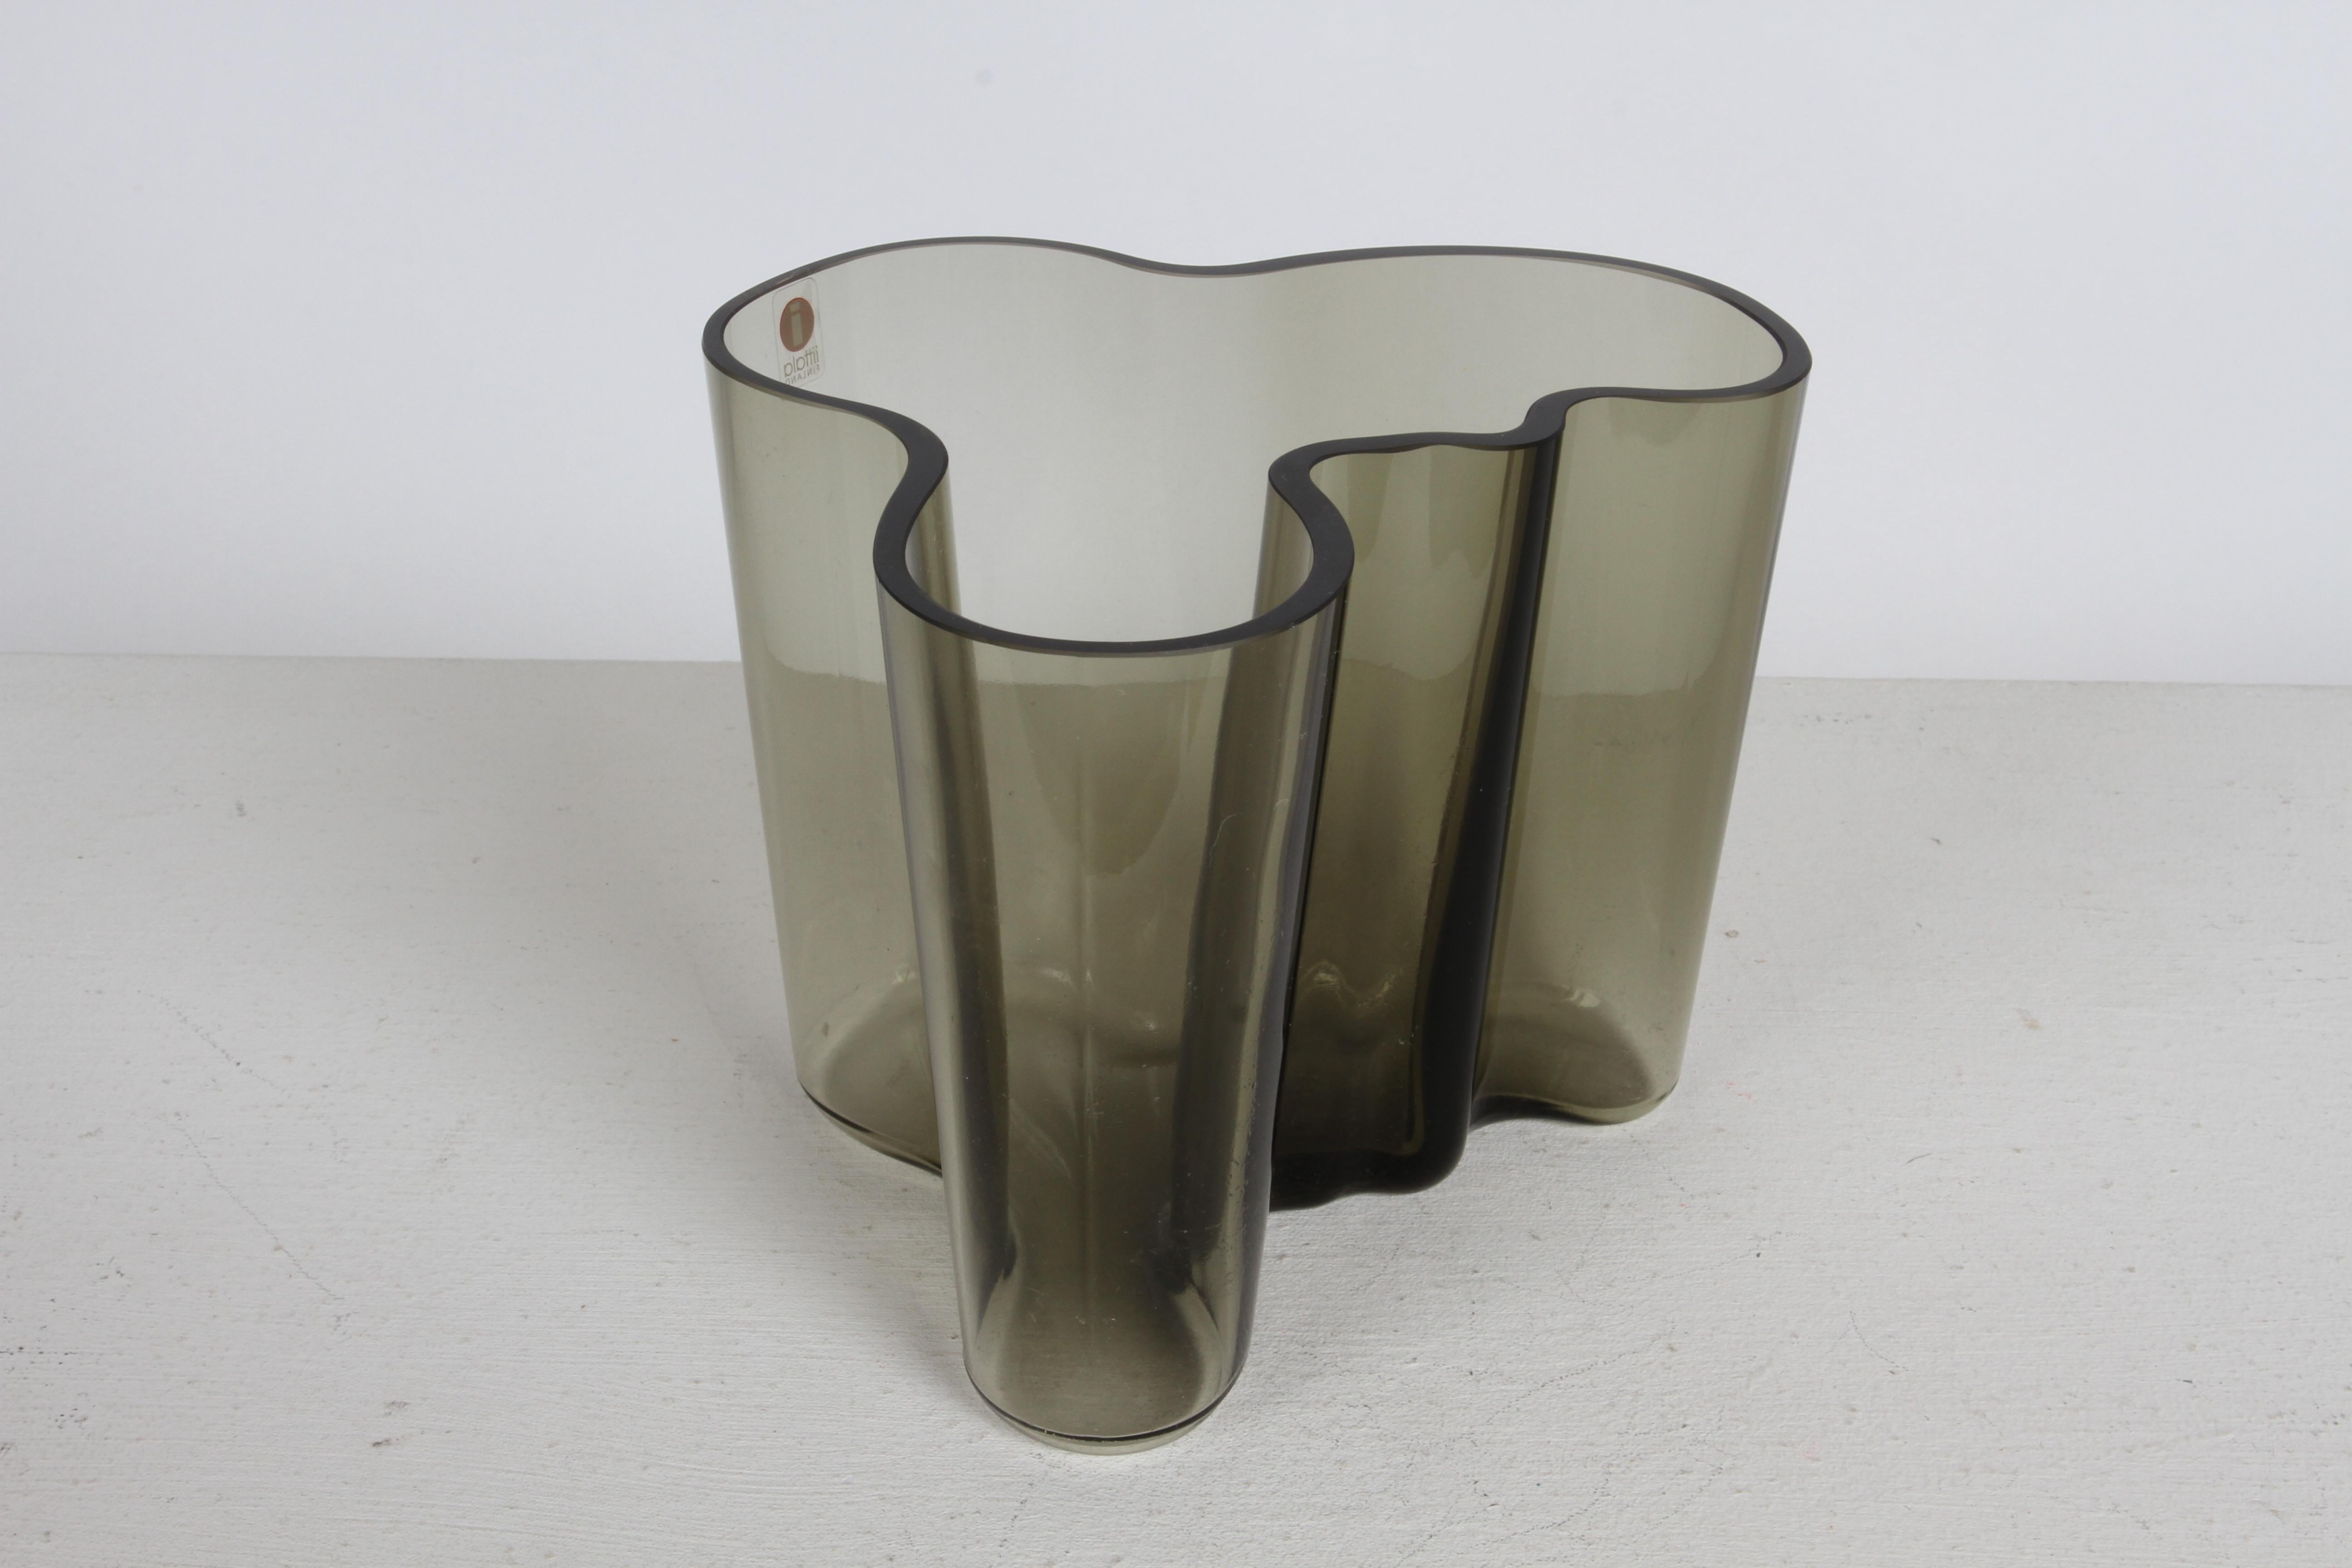 Late 20th Century 1970s MCM Alvar Aalto Savoy Vase 3030 in Smoke Gray Glass by Iittala Finland For Sale